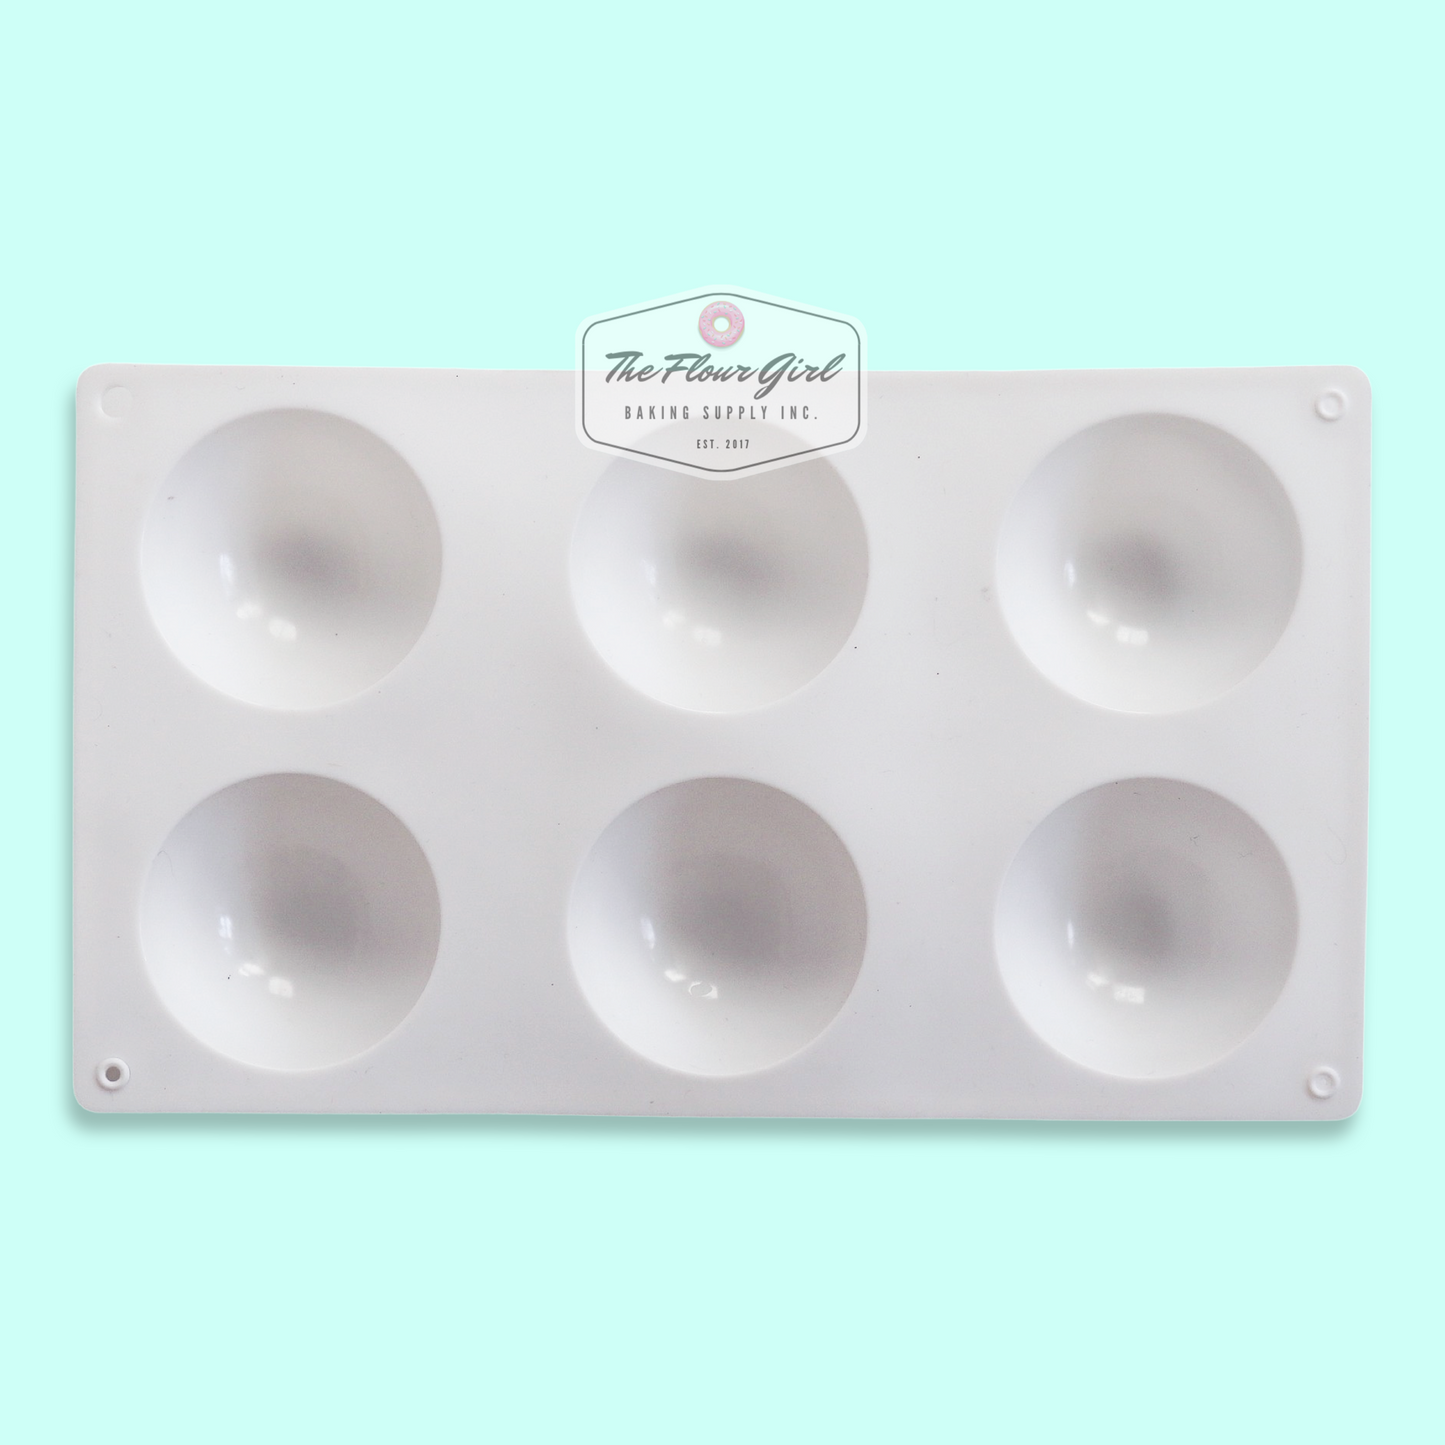 3D 6-Cavity Silicone Sphere Hot Chocolate Bomb Mold